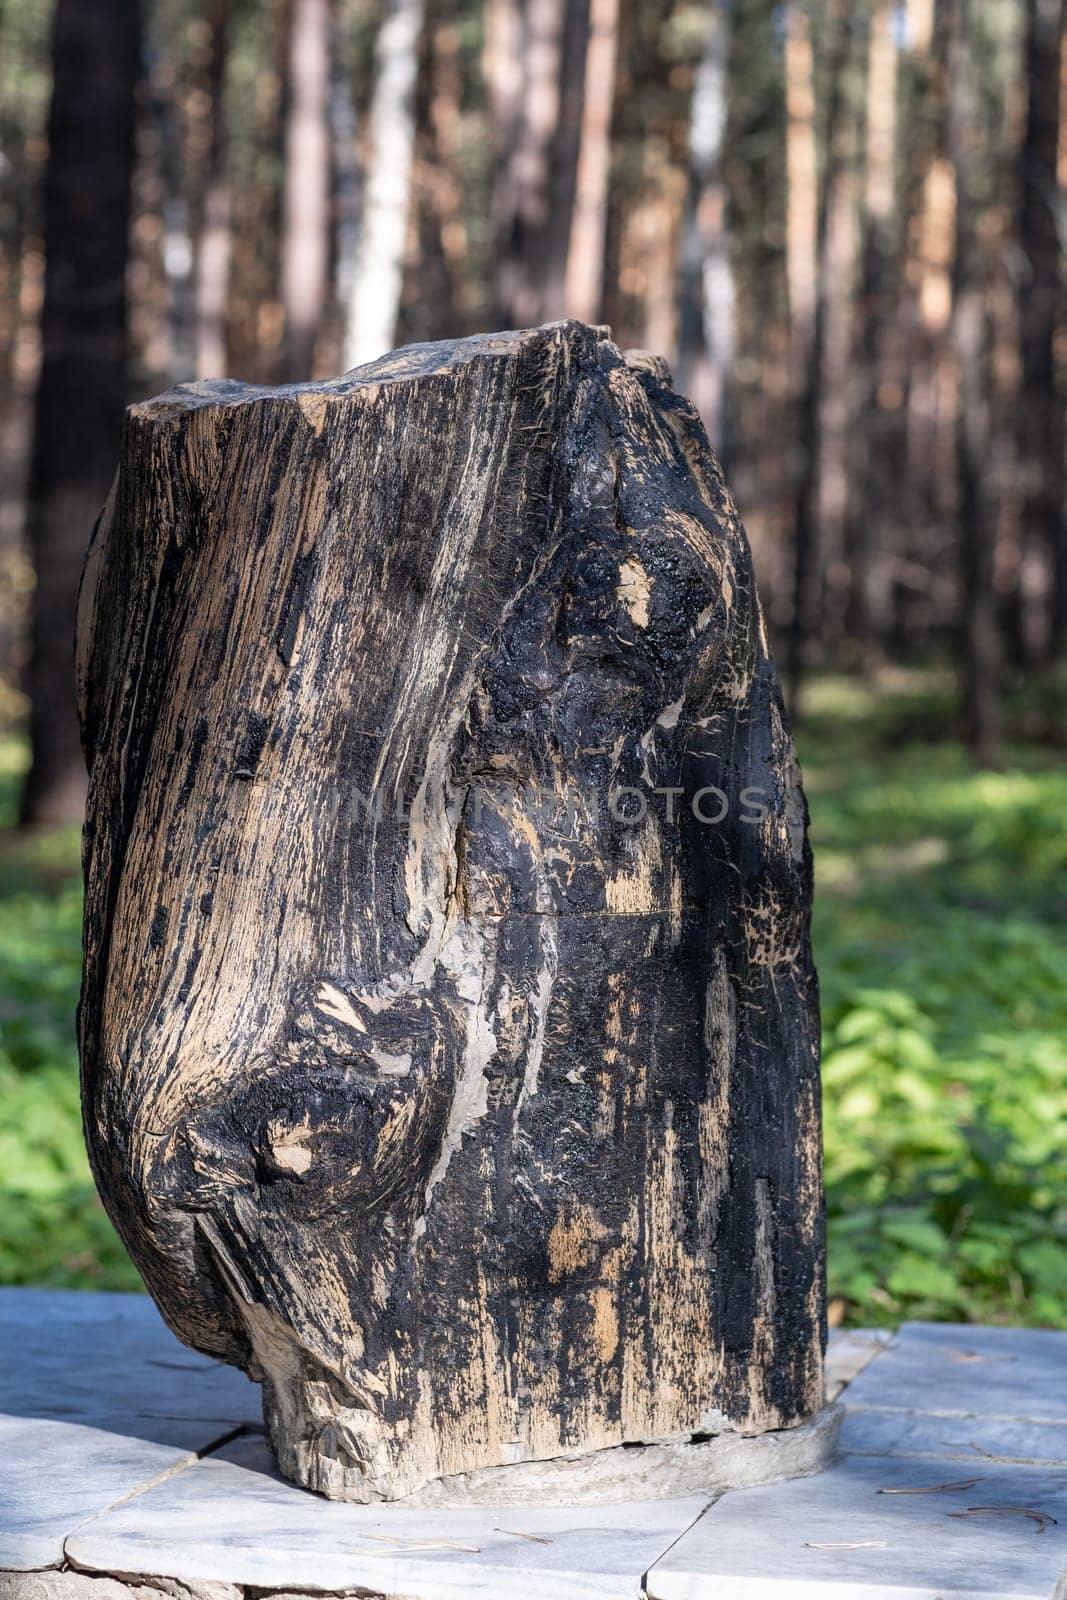 Petrified wood in the park as an expanse, abstract pattern of cracks, by AnatoliiFoto